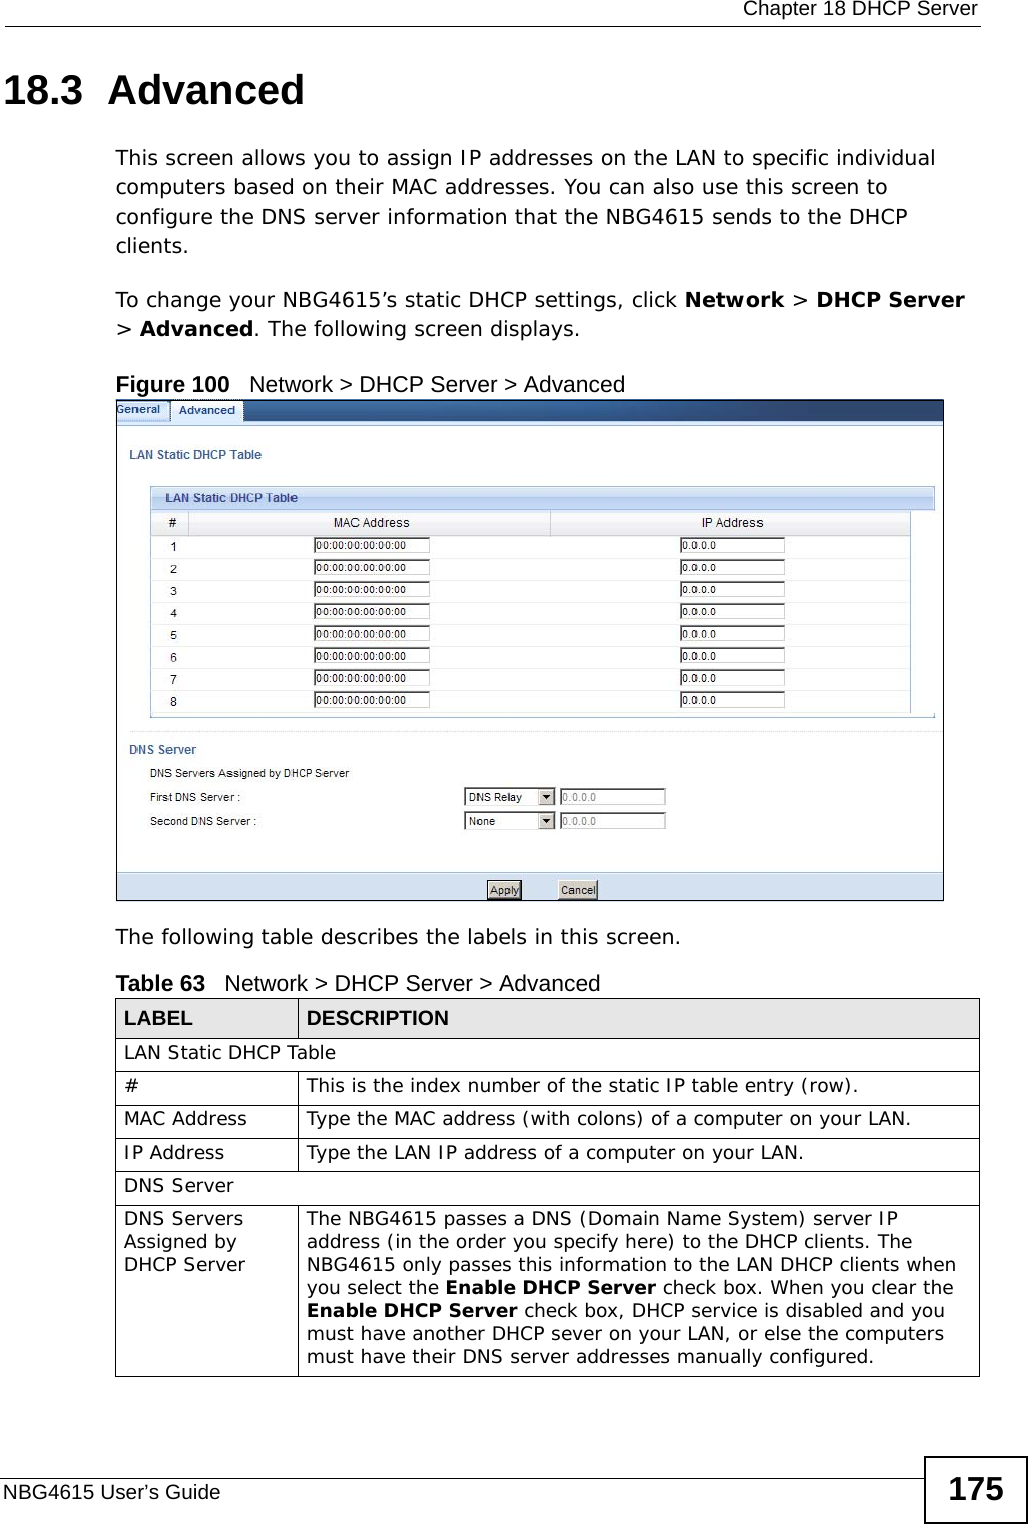  Chapter 18 DHCP ServerNBG4615 User’s Guide 17518.3  Advanced    This screen allows you to assign IP addresses on the LAN to specific individual computers based on their MAC addresses. You can also use this screen to configure the DNS server information that the NBG4615 sends to the DHCP clients.To change your NBG4615’s static DHCP settings, click Network &gt; DHCP Server &gt; Advanced. The following screen displays.Figure 100   Network &gt; DHCP Server &gt; Advanced The following table describes the labels in this screen.Table 63   Network &gt; DHCP Server &gt; AdvancedLABEL DESCRIPTIONLAN Static DHCP Table# This is the index number of the static IP table entry (row).MAC Address Type the MAC address (with colons) of a computer on your LAN.IP Address Type the LAN IP address of a computer on your LAN.DNS ServerDNS Servers Assigned by DHCP Server The NBG4615 passes a DNS (Domain Name System) server IP address (in the order you specify here) to the DHCP clients. The NBG4615 only passes this information to the LAN DHCP clients when you select the Enable DHCP Server check box. When you clear the Enable DHCP Server check box, DHCP service is disabled and you must have another DHCP sever on your LAN, or else the computers must have their DNS server addresses manually configured.